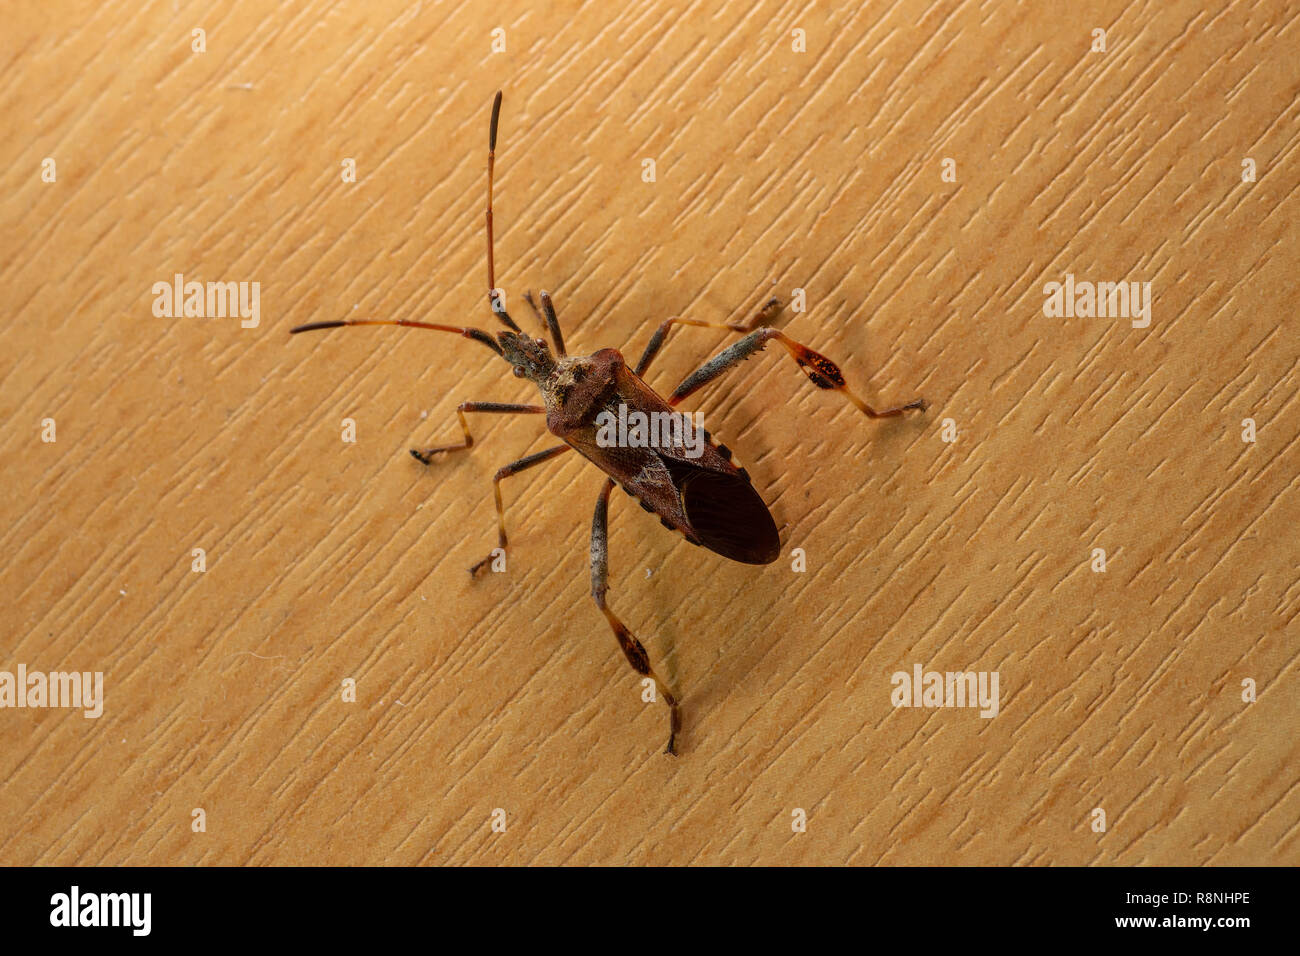 Western Conifer Seed Bug(Leptoglossus occidentalis) found inside the house. Stock Photo